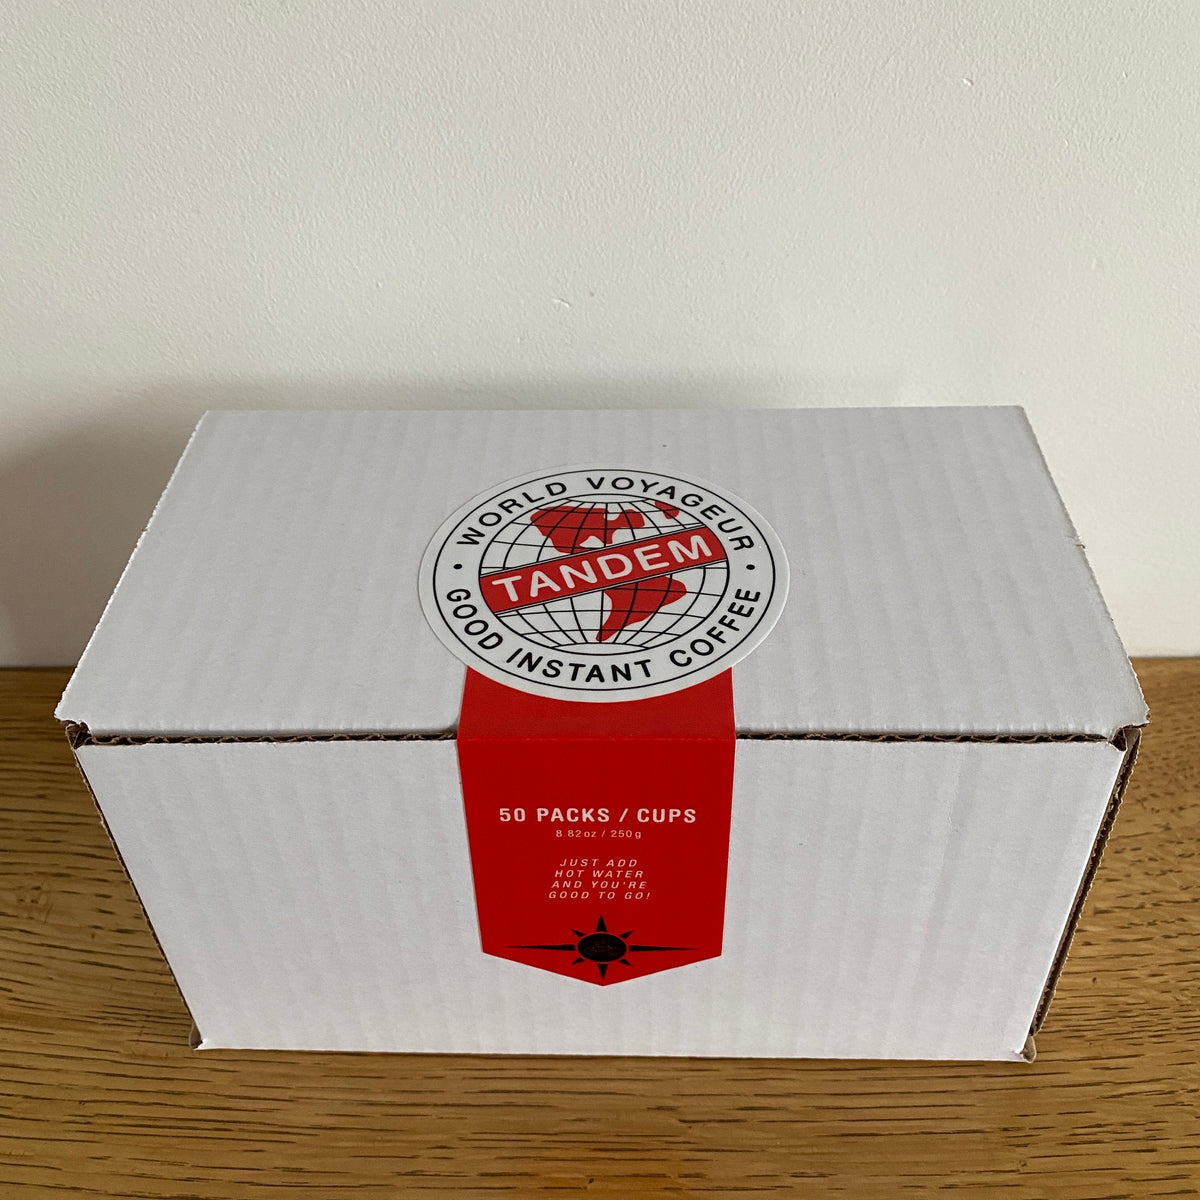 A white cardboard box with red and white labels, featuring the text "Tandem Coffee Roasters World Voyageur instant coffee," plus product details like "50 packets/cups." The box sits on a wooden surface.